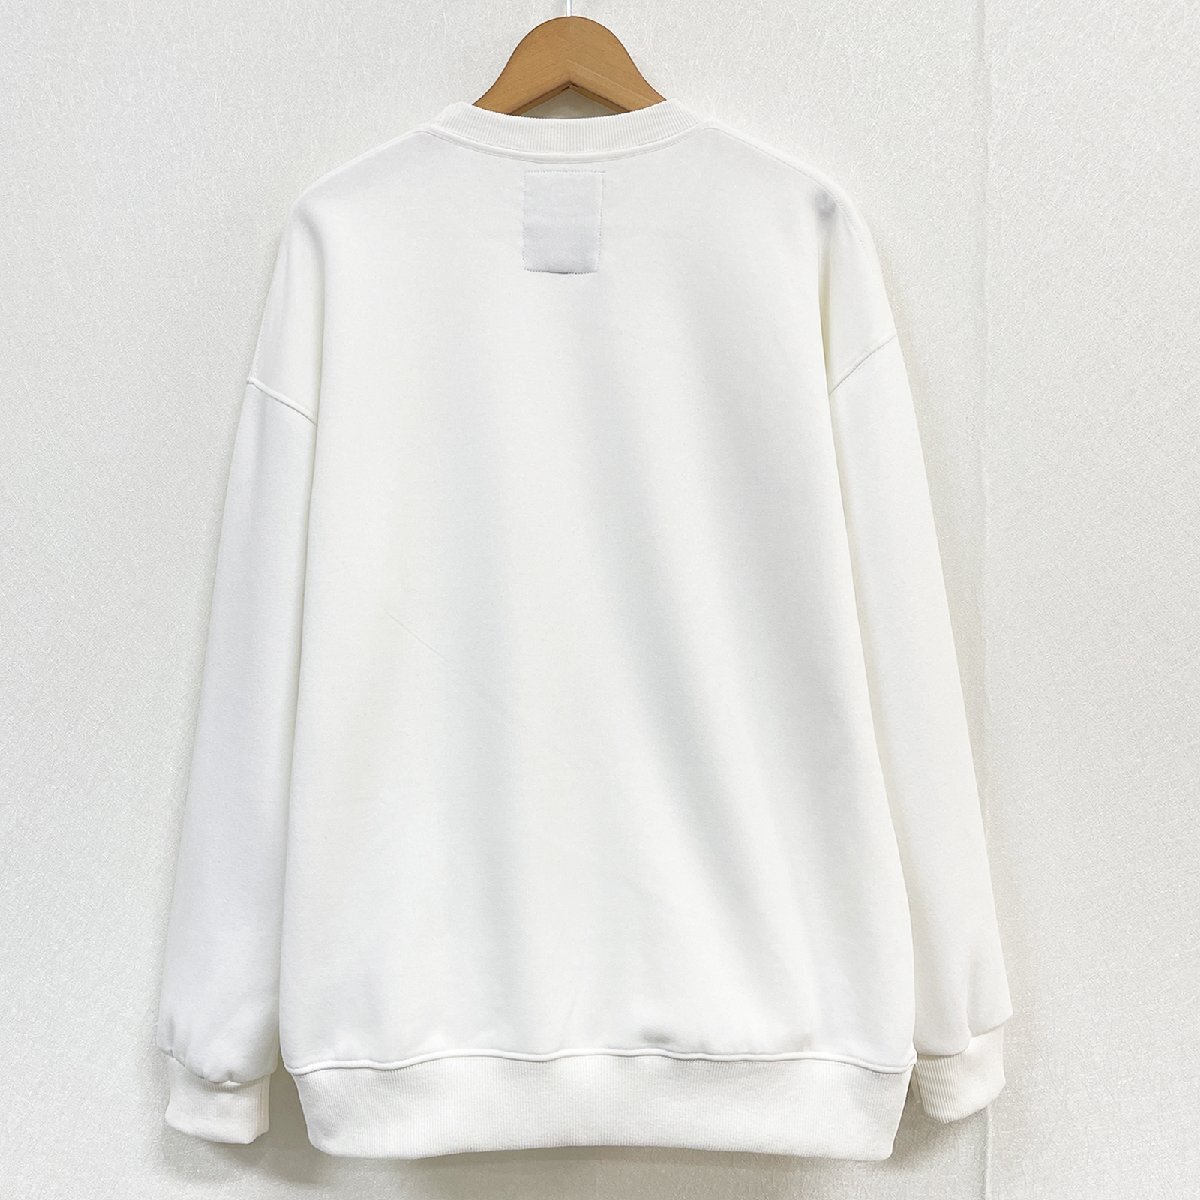  high grade Europe made * regular price 4 ten thousand * BVLGARY a departure *RISELIN sweatshirt cotton 100% comfortable ventilation elasticity Heart pull over colorful everyday man and woman use M